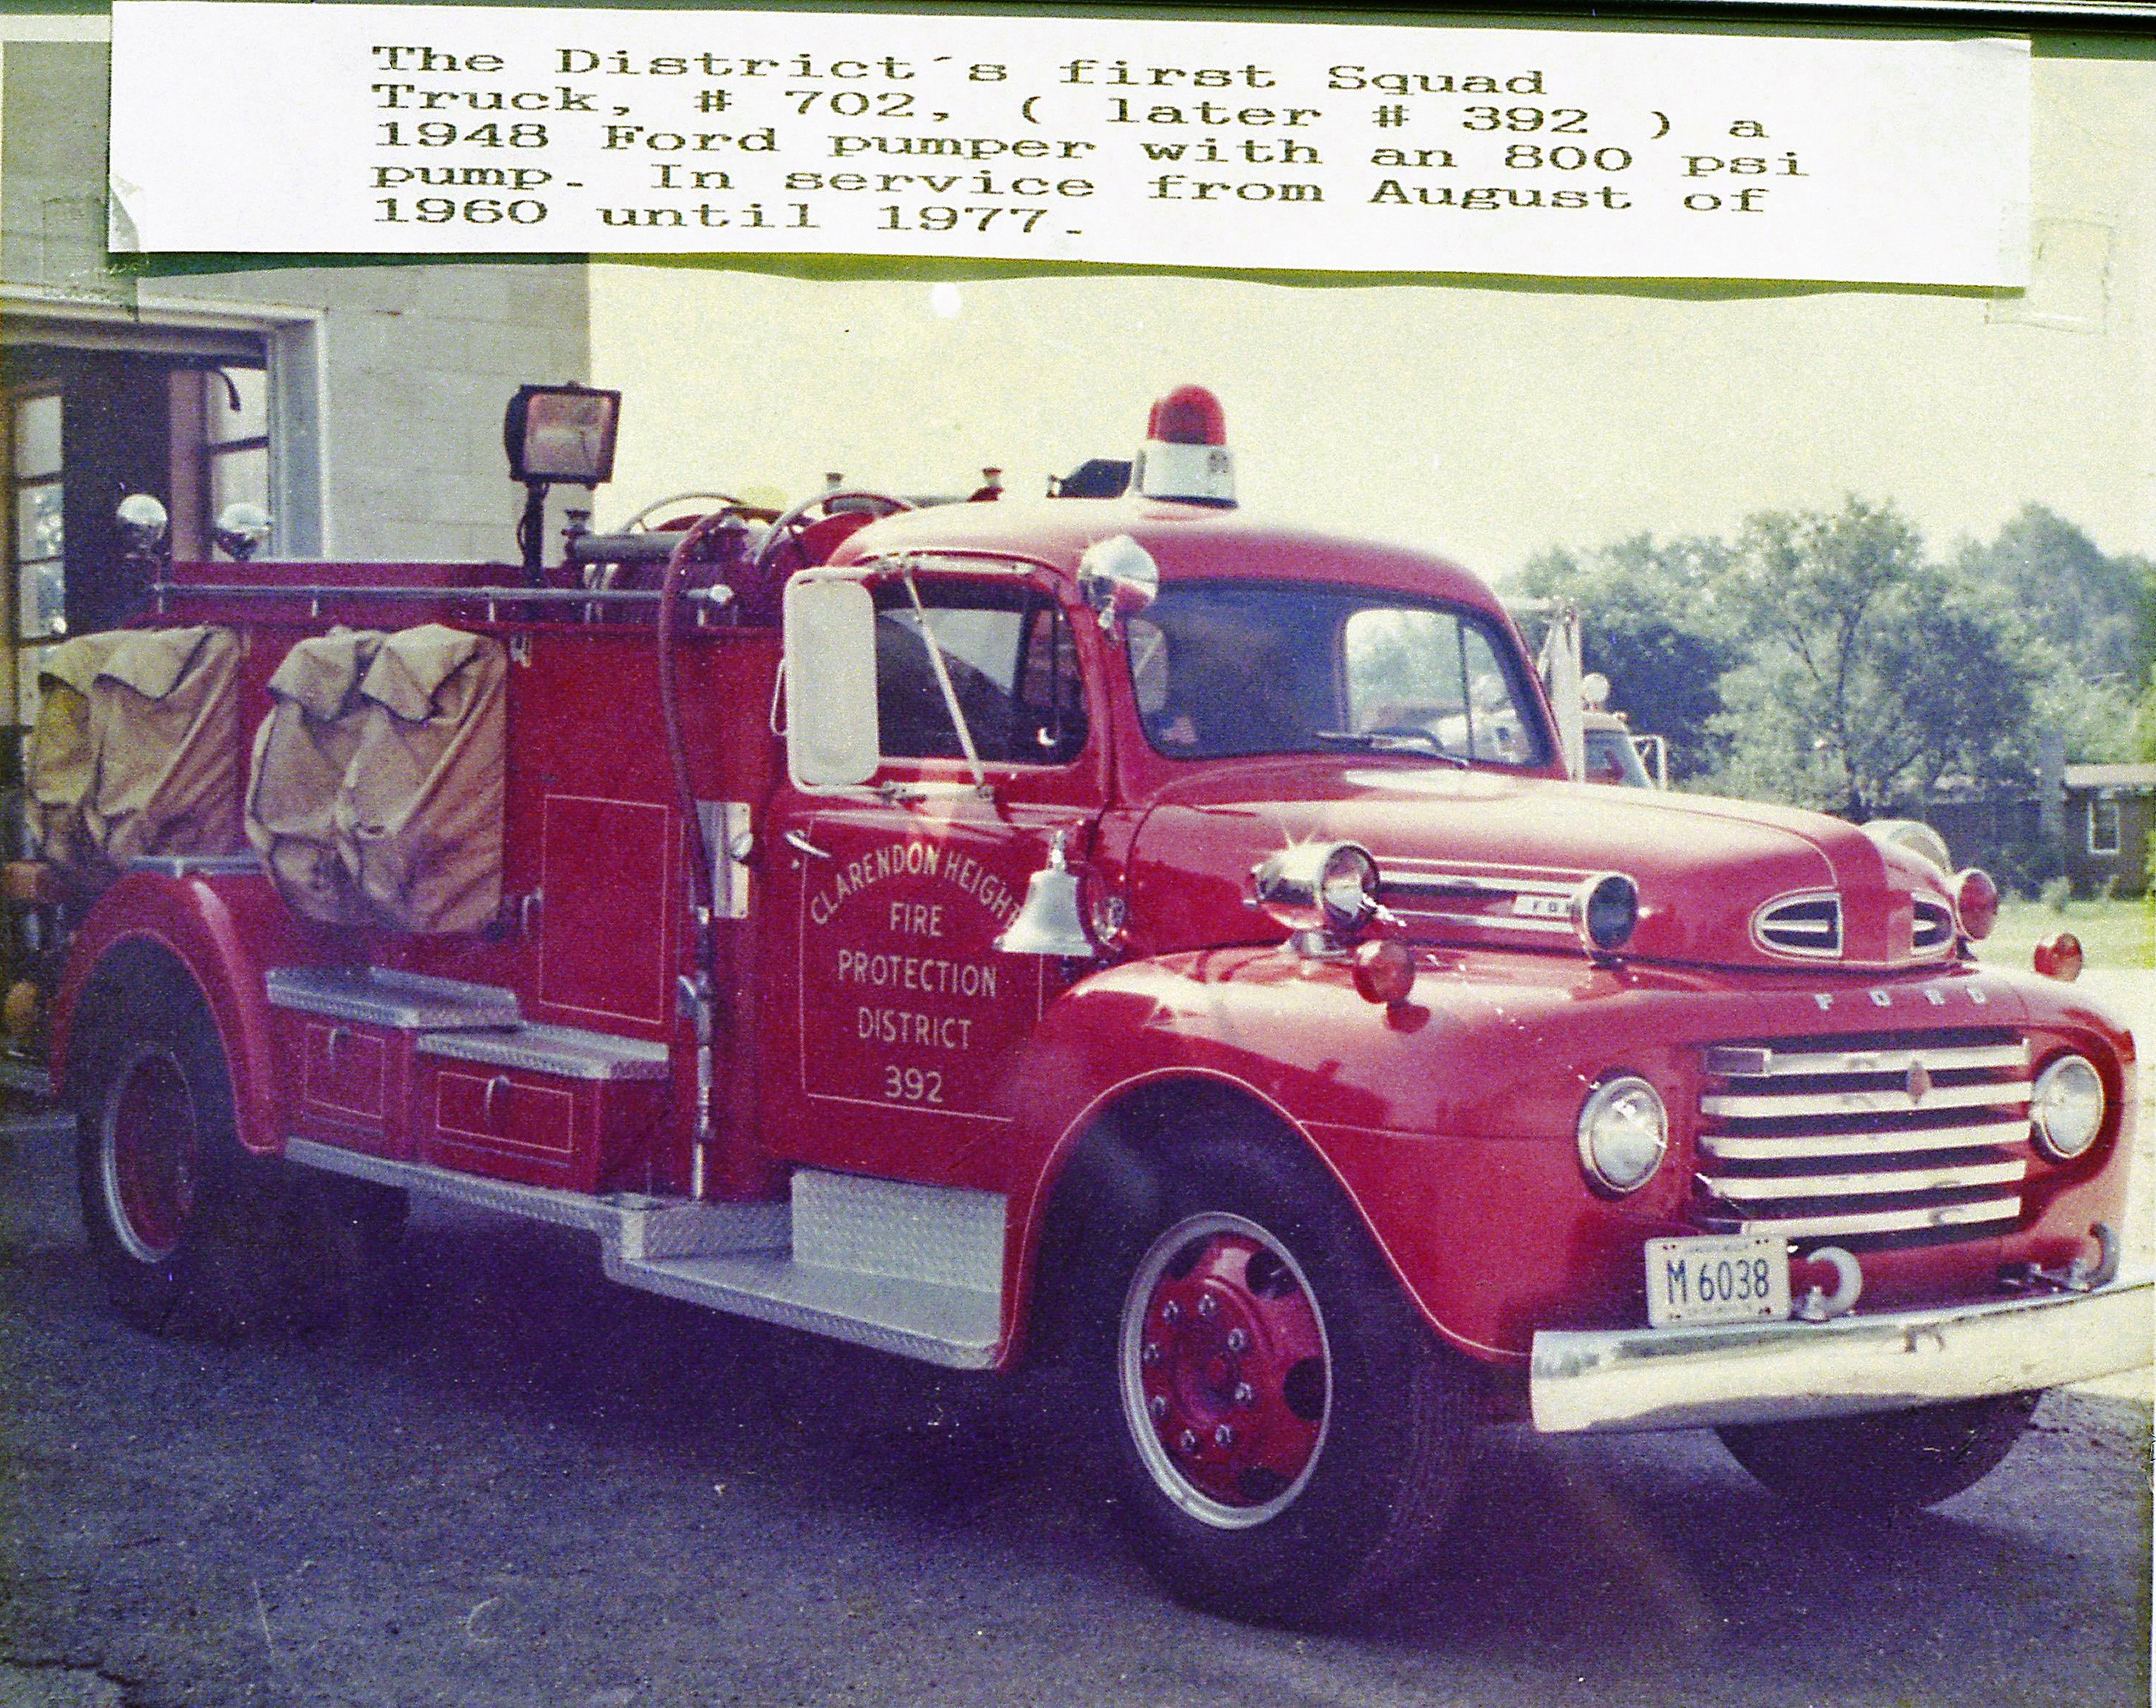 CLARENDON HEIGHTS SQUAD 392 1948 FORD - JOHN BEAN FIRST SQUAD TRUCK